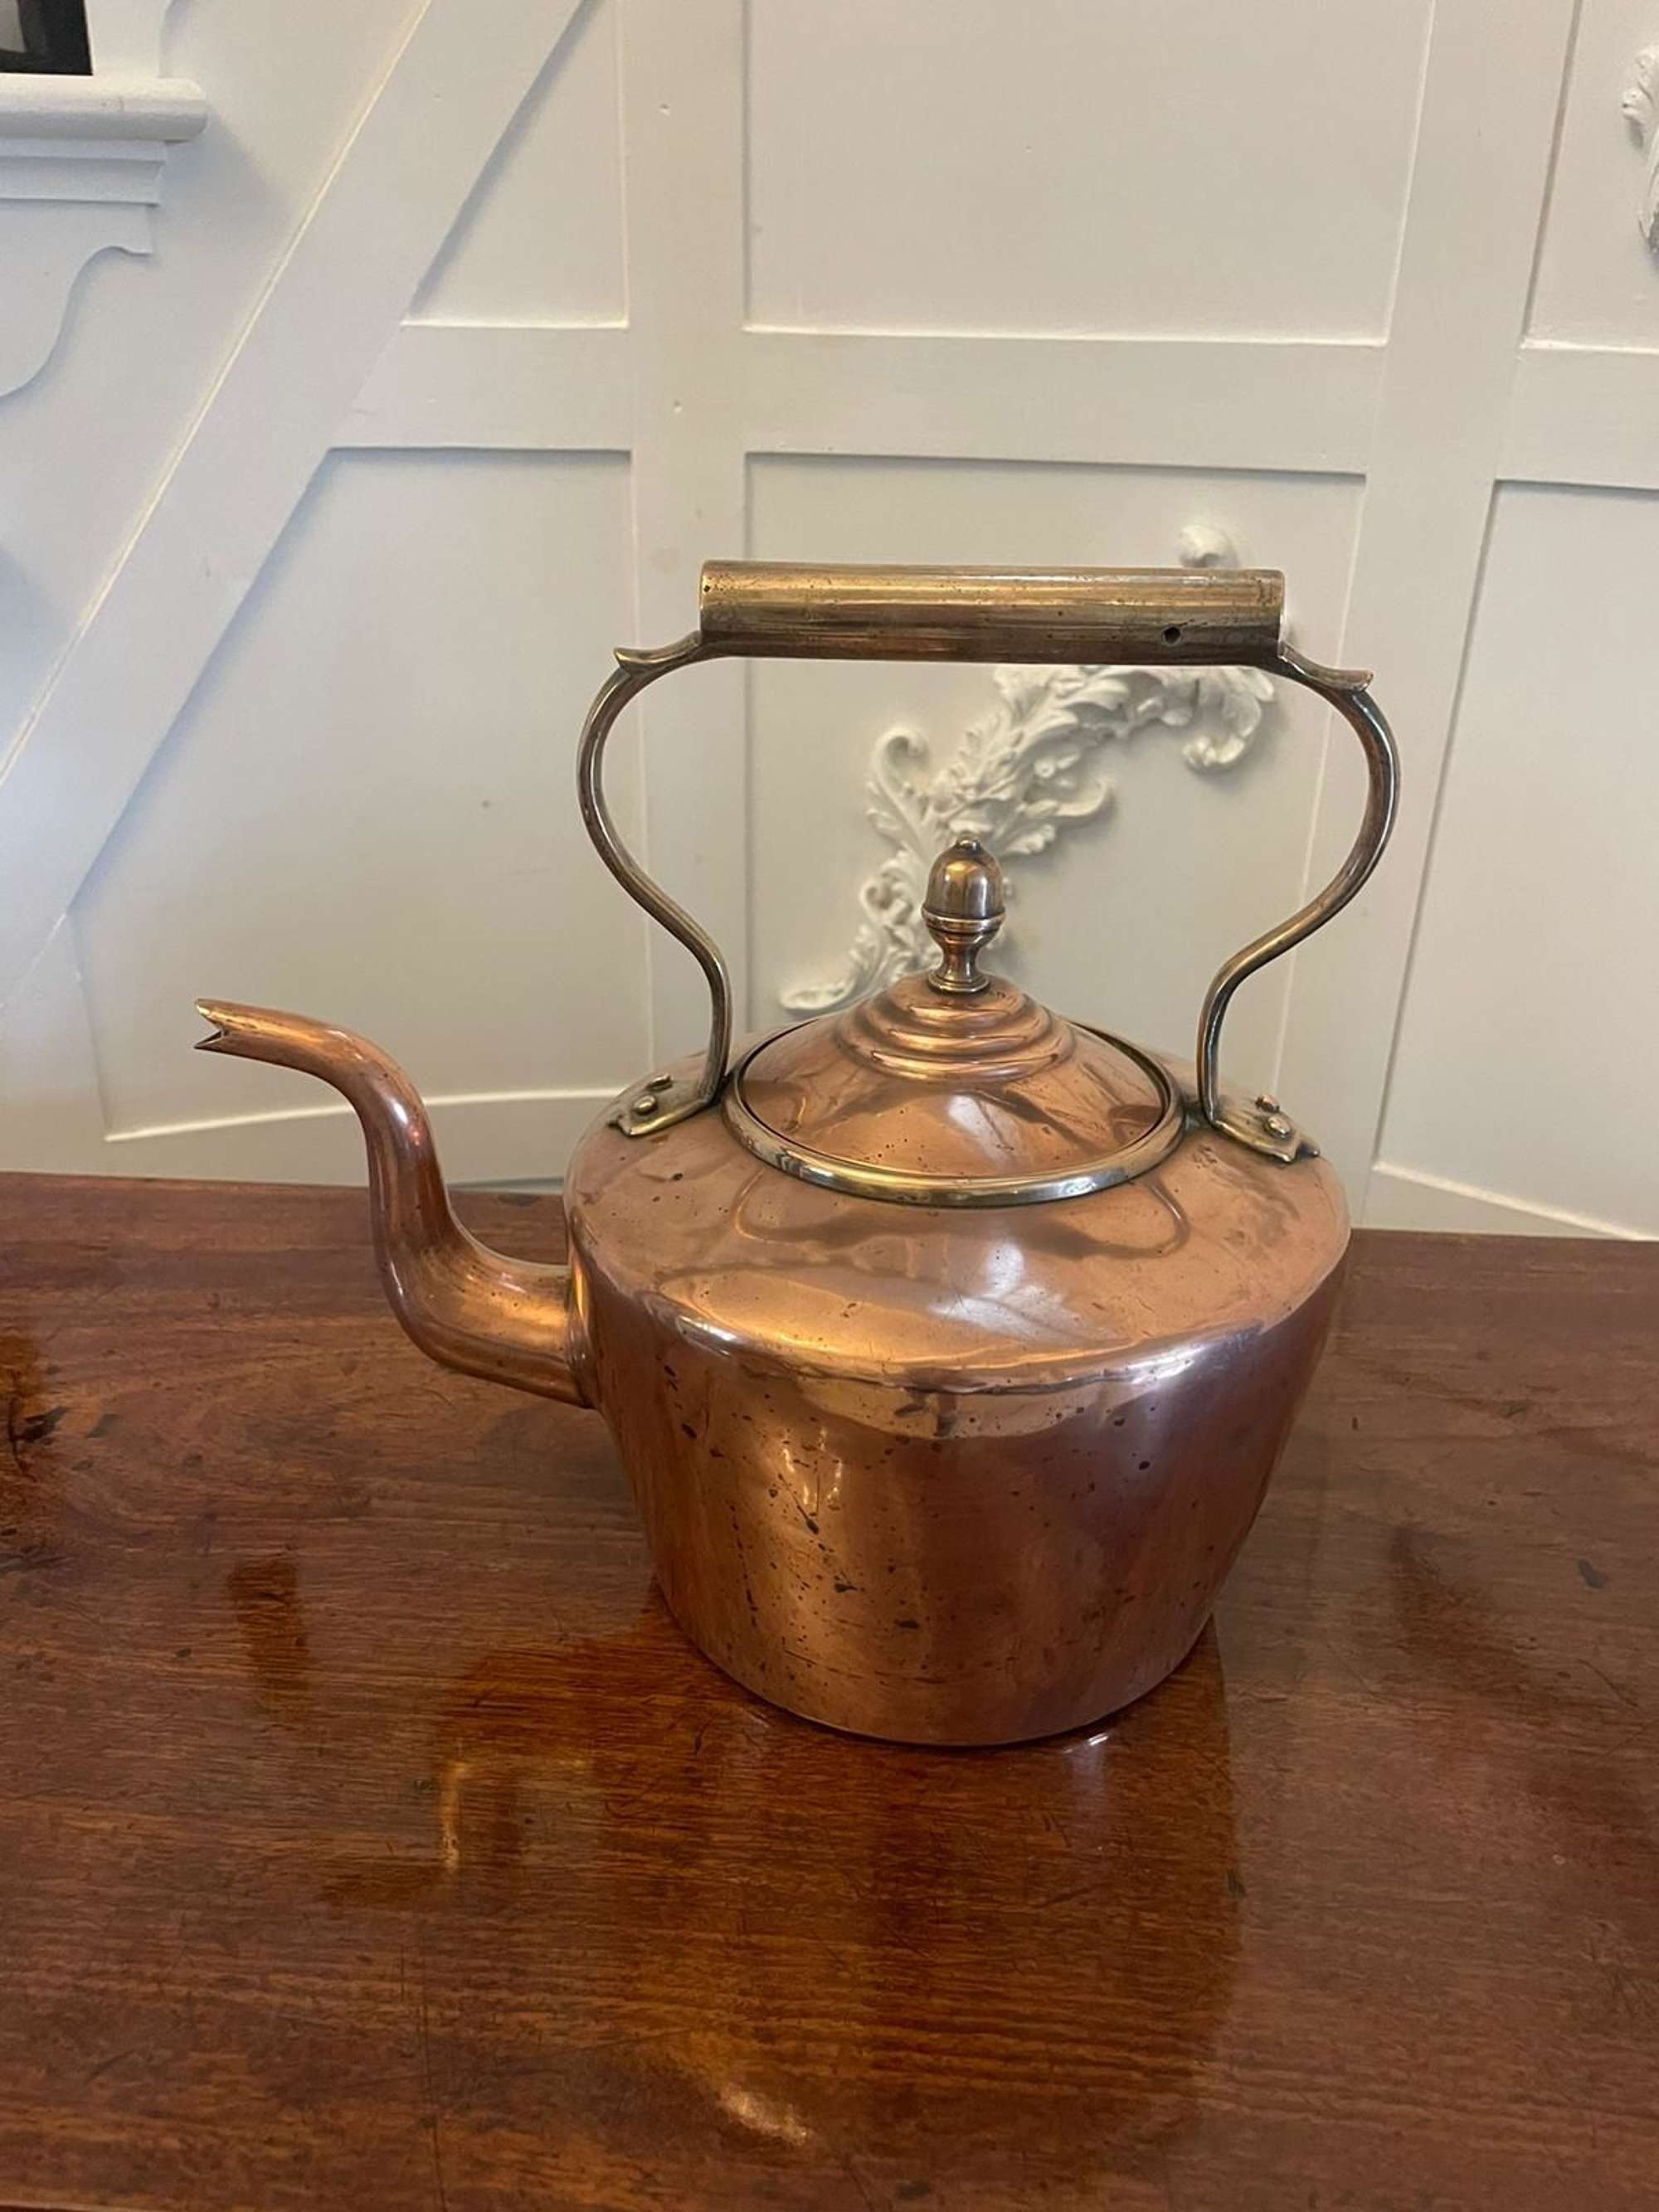 Antique George III Quality Copper Kettle